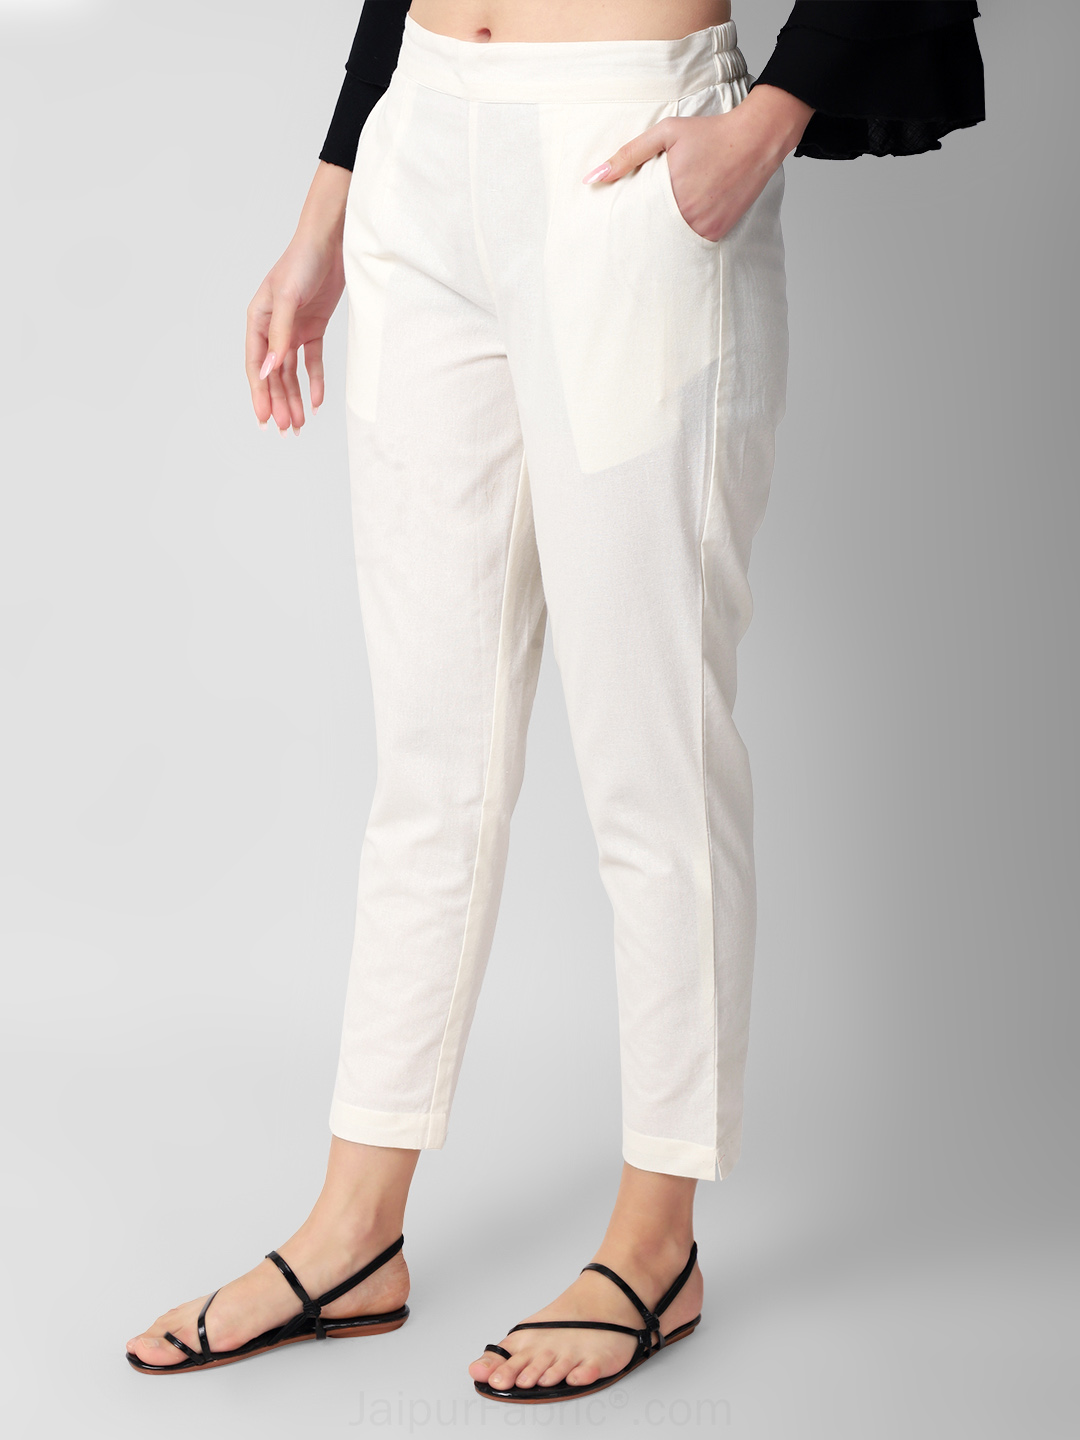 Pearl Glow Women Cotton Pants casual and semi formal daily trousers